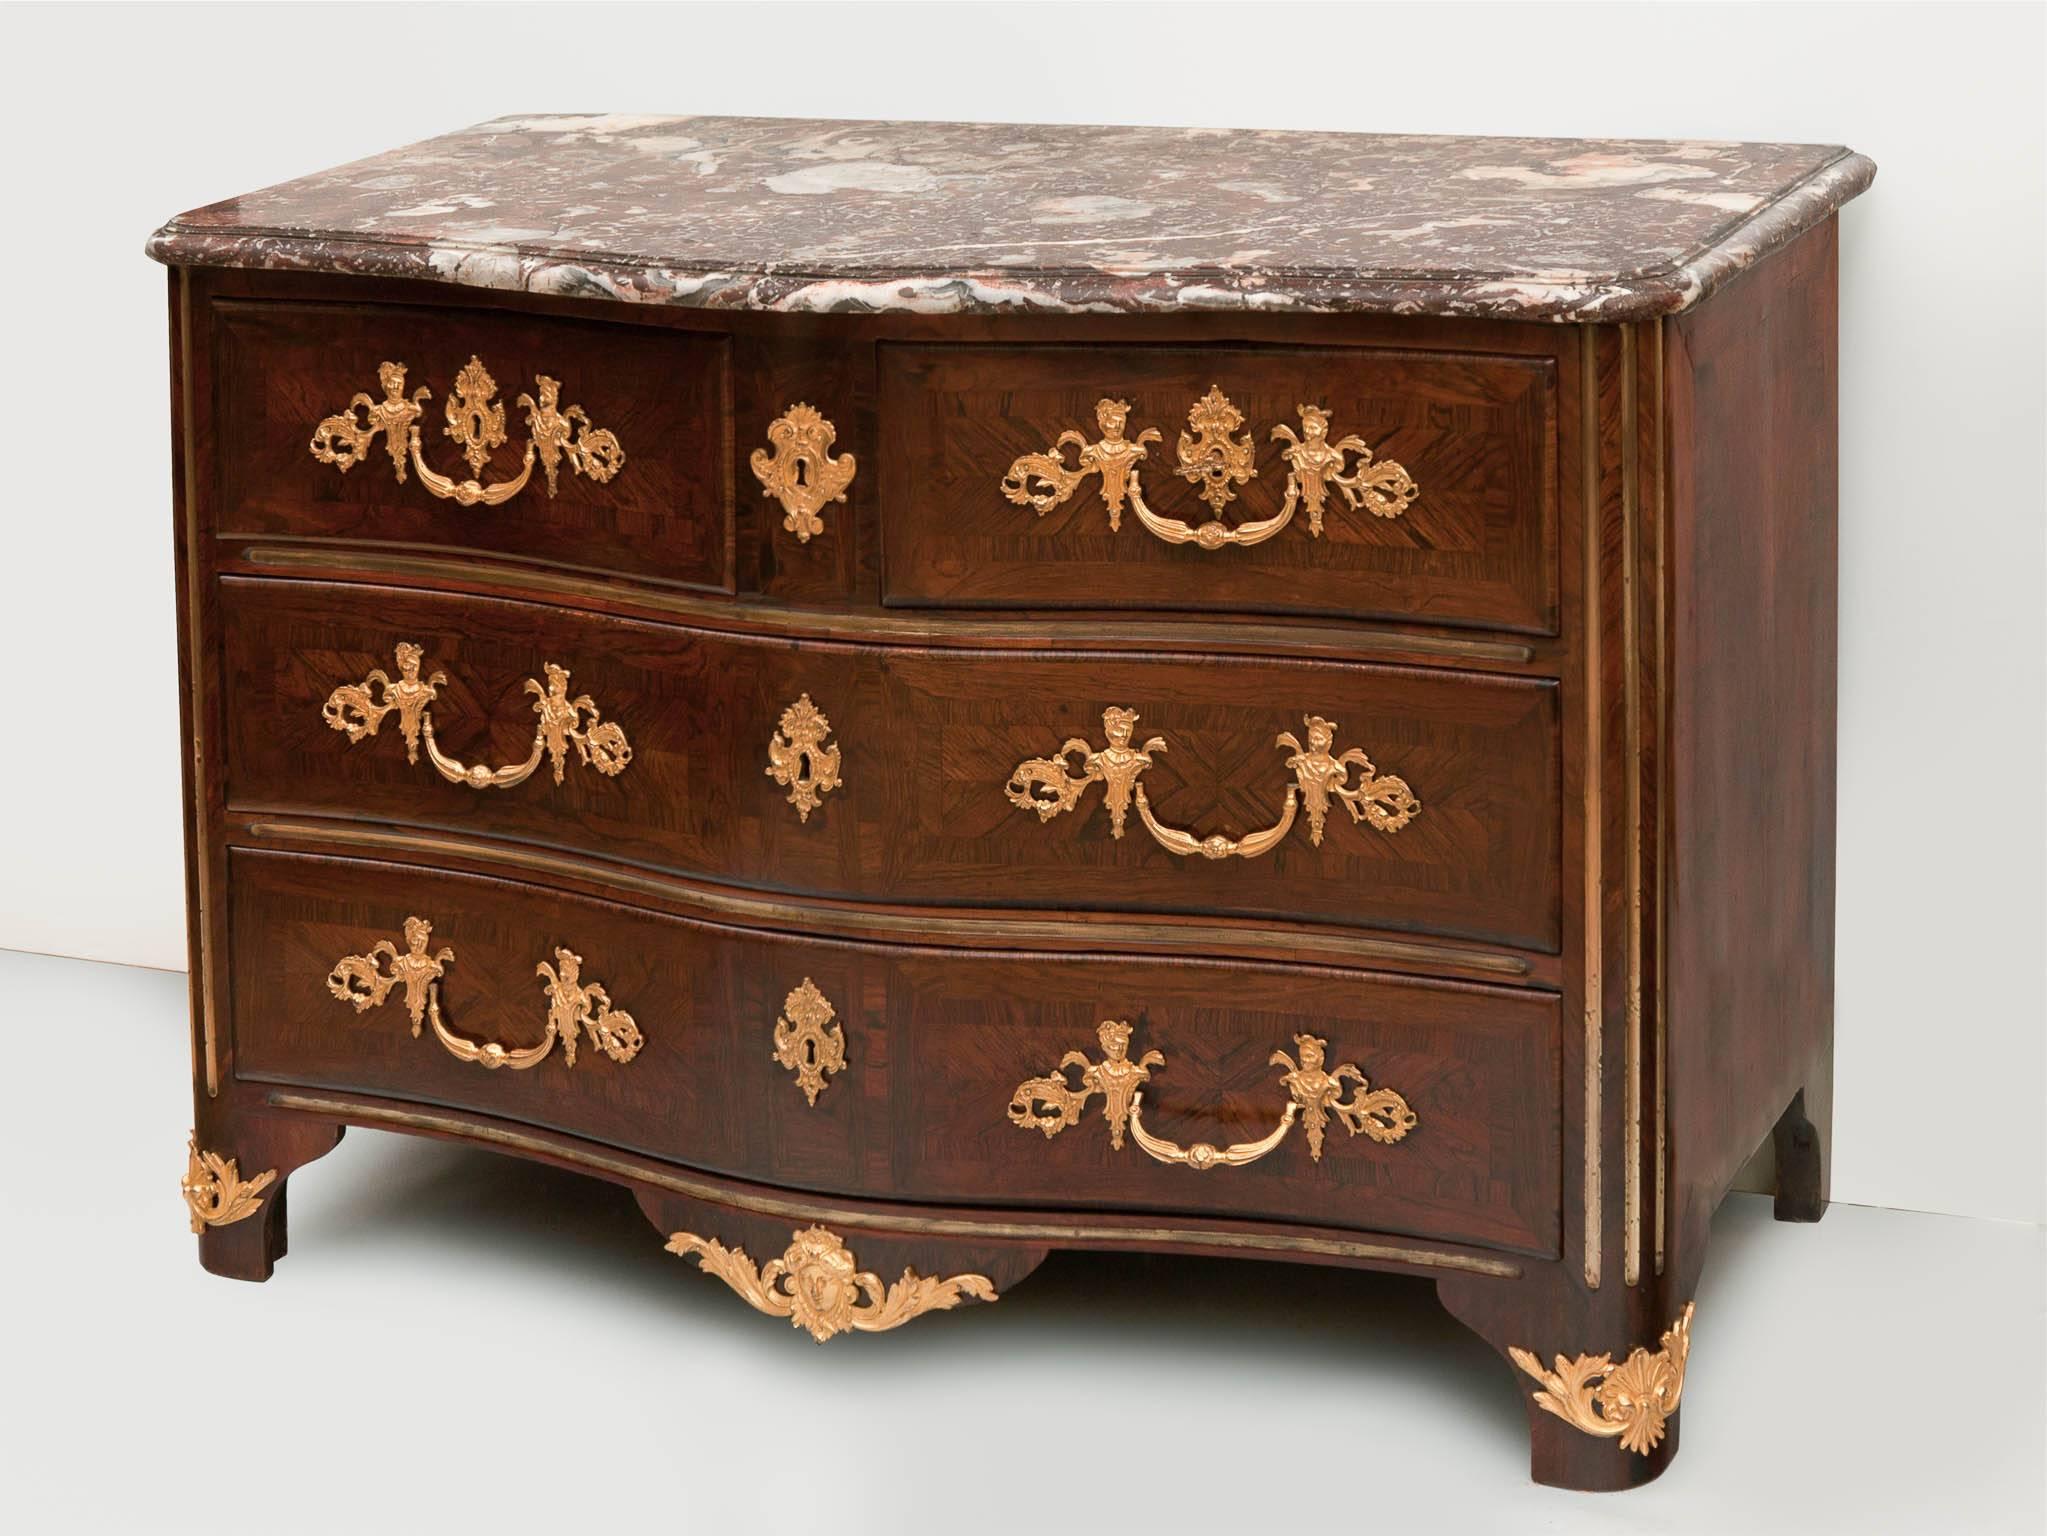 Serpentine fronted Regence commode. Rosewood parquetry veneer with gilt bronze mounts, handles & escutcheons, original locks with one key. Shaped red veined Pyrenean marble over two short drawers and two long drawers. the sides with brass